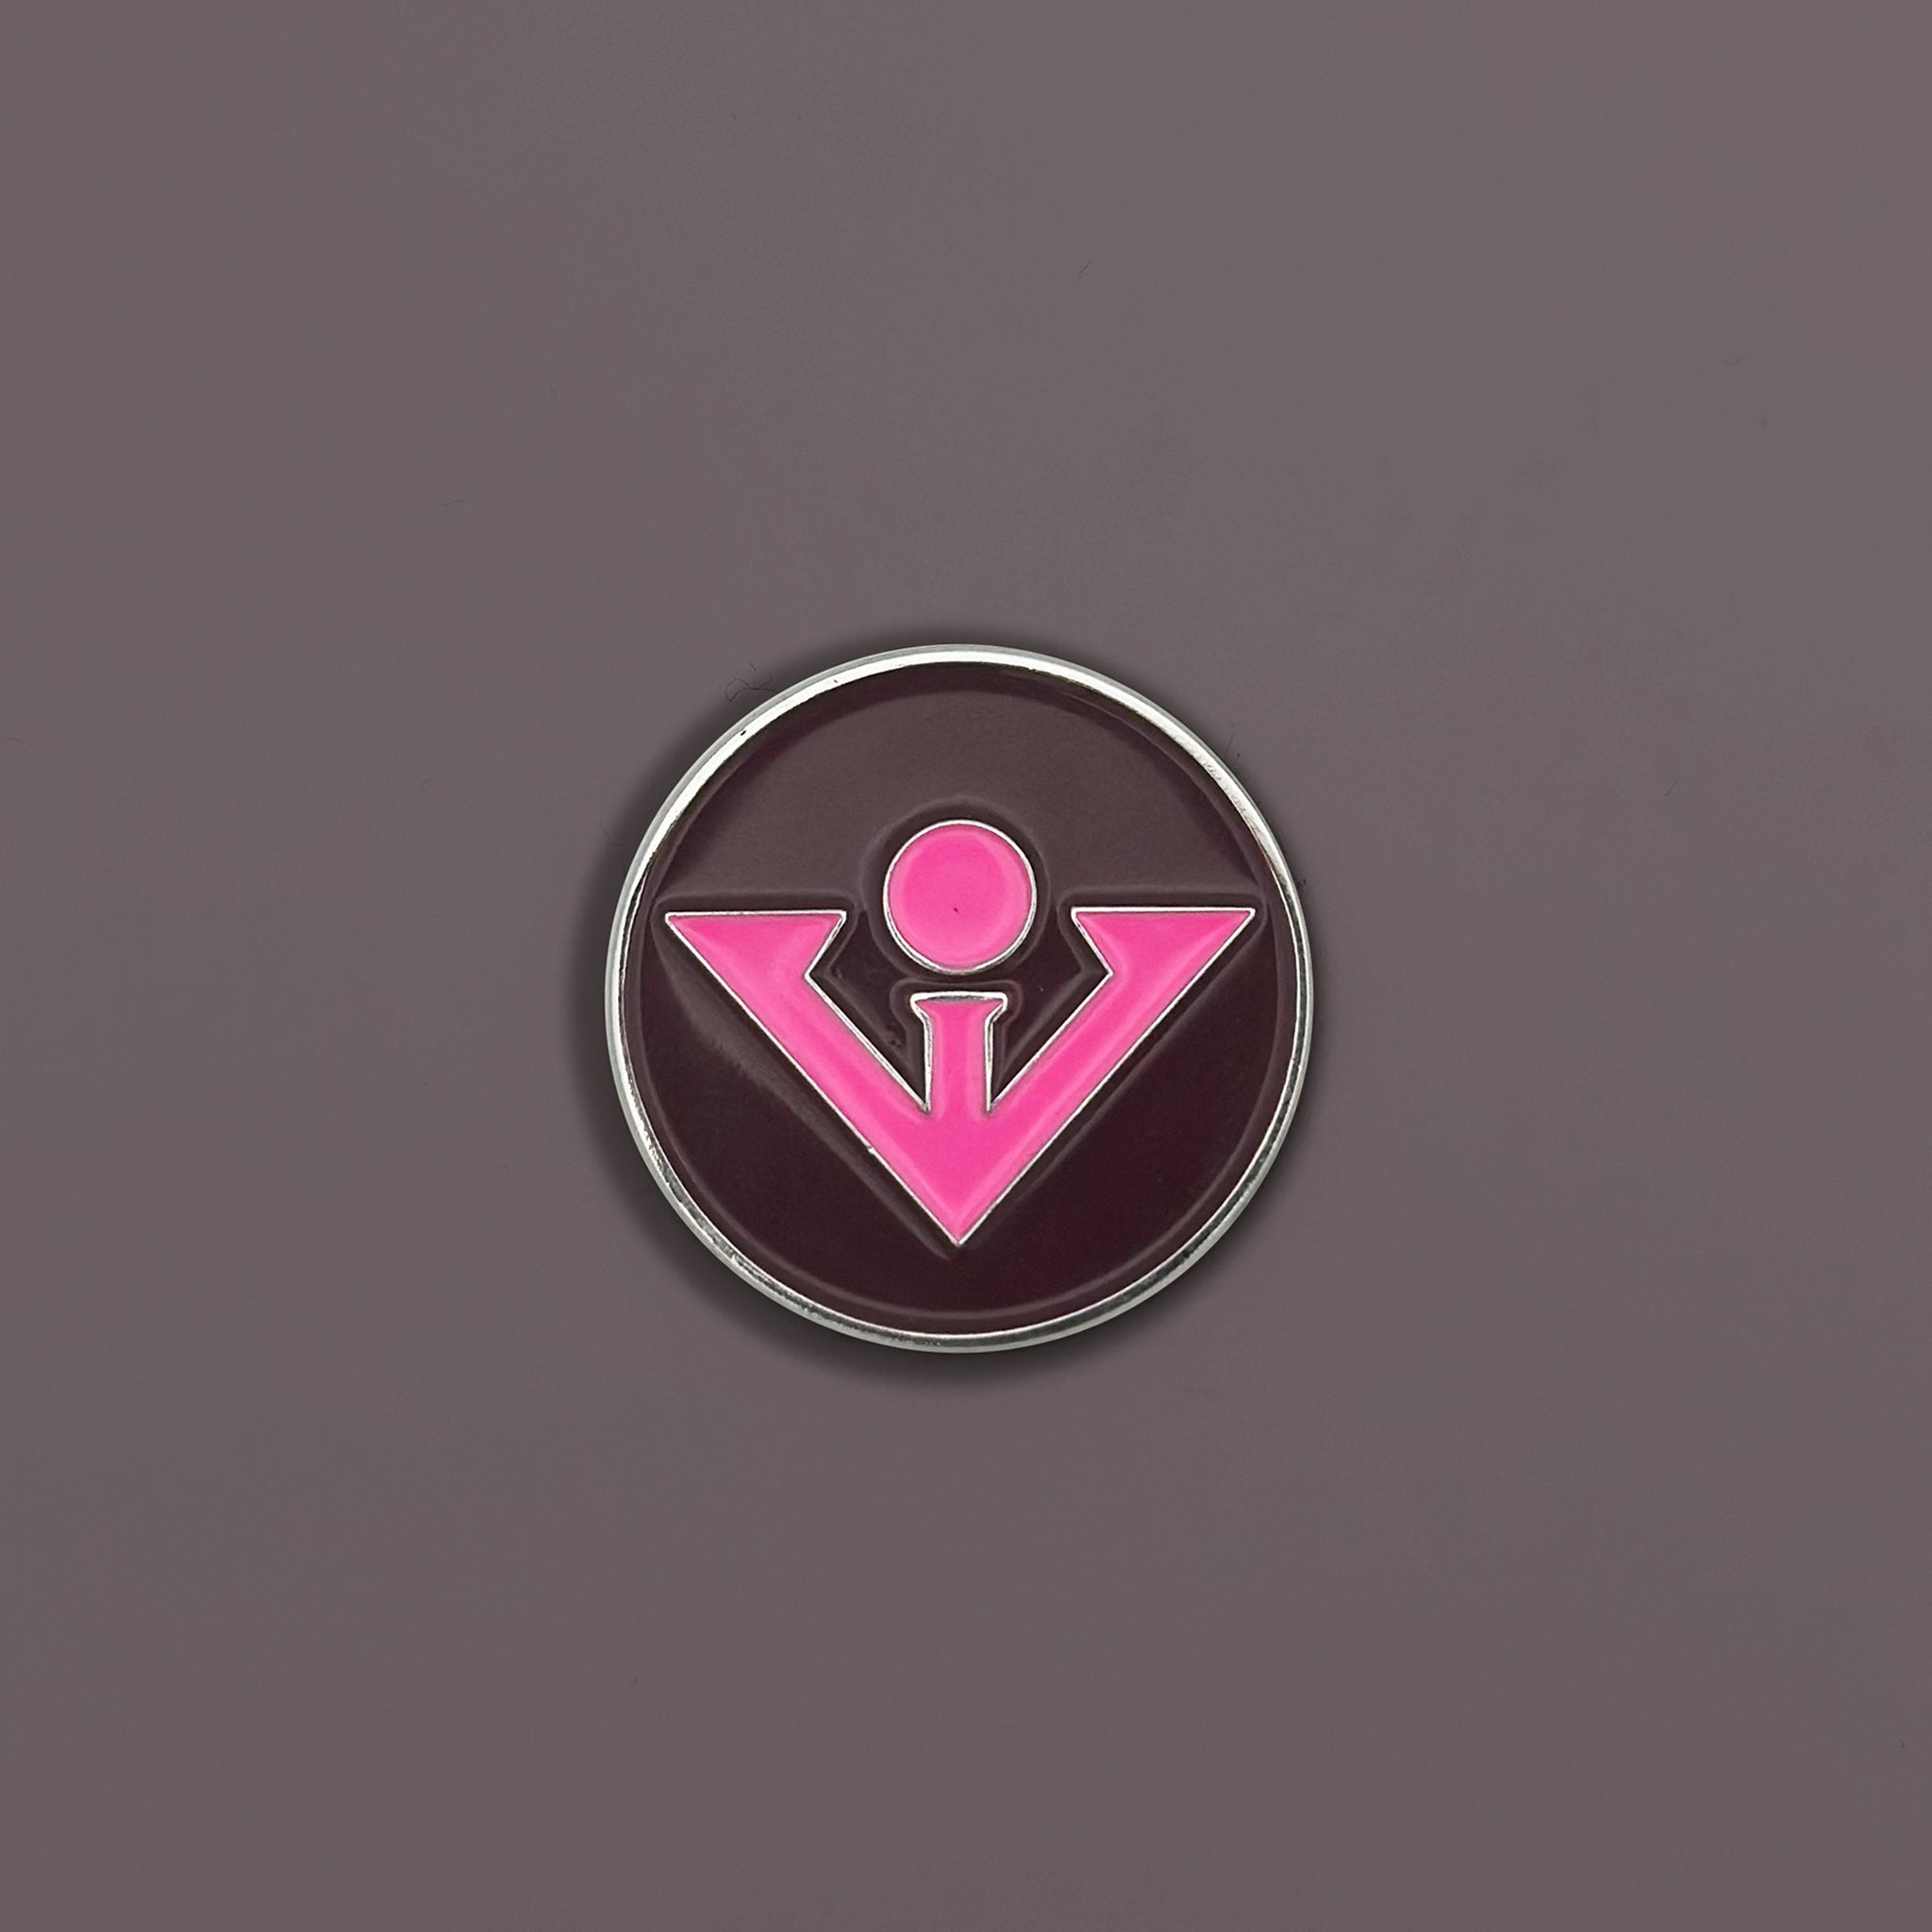 Burgundy and pink magnetic Golf Ball Marker front view